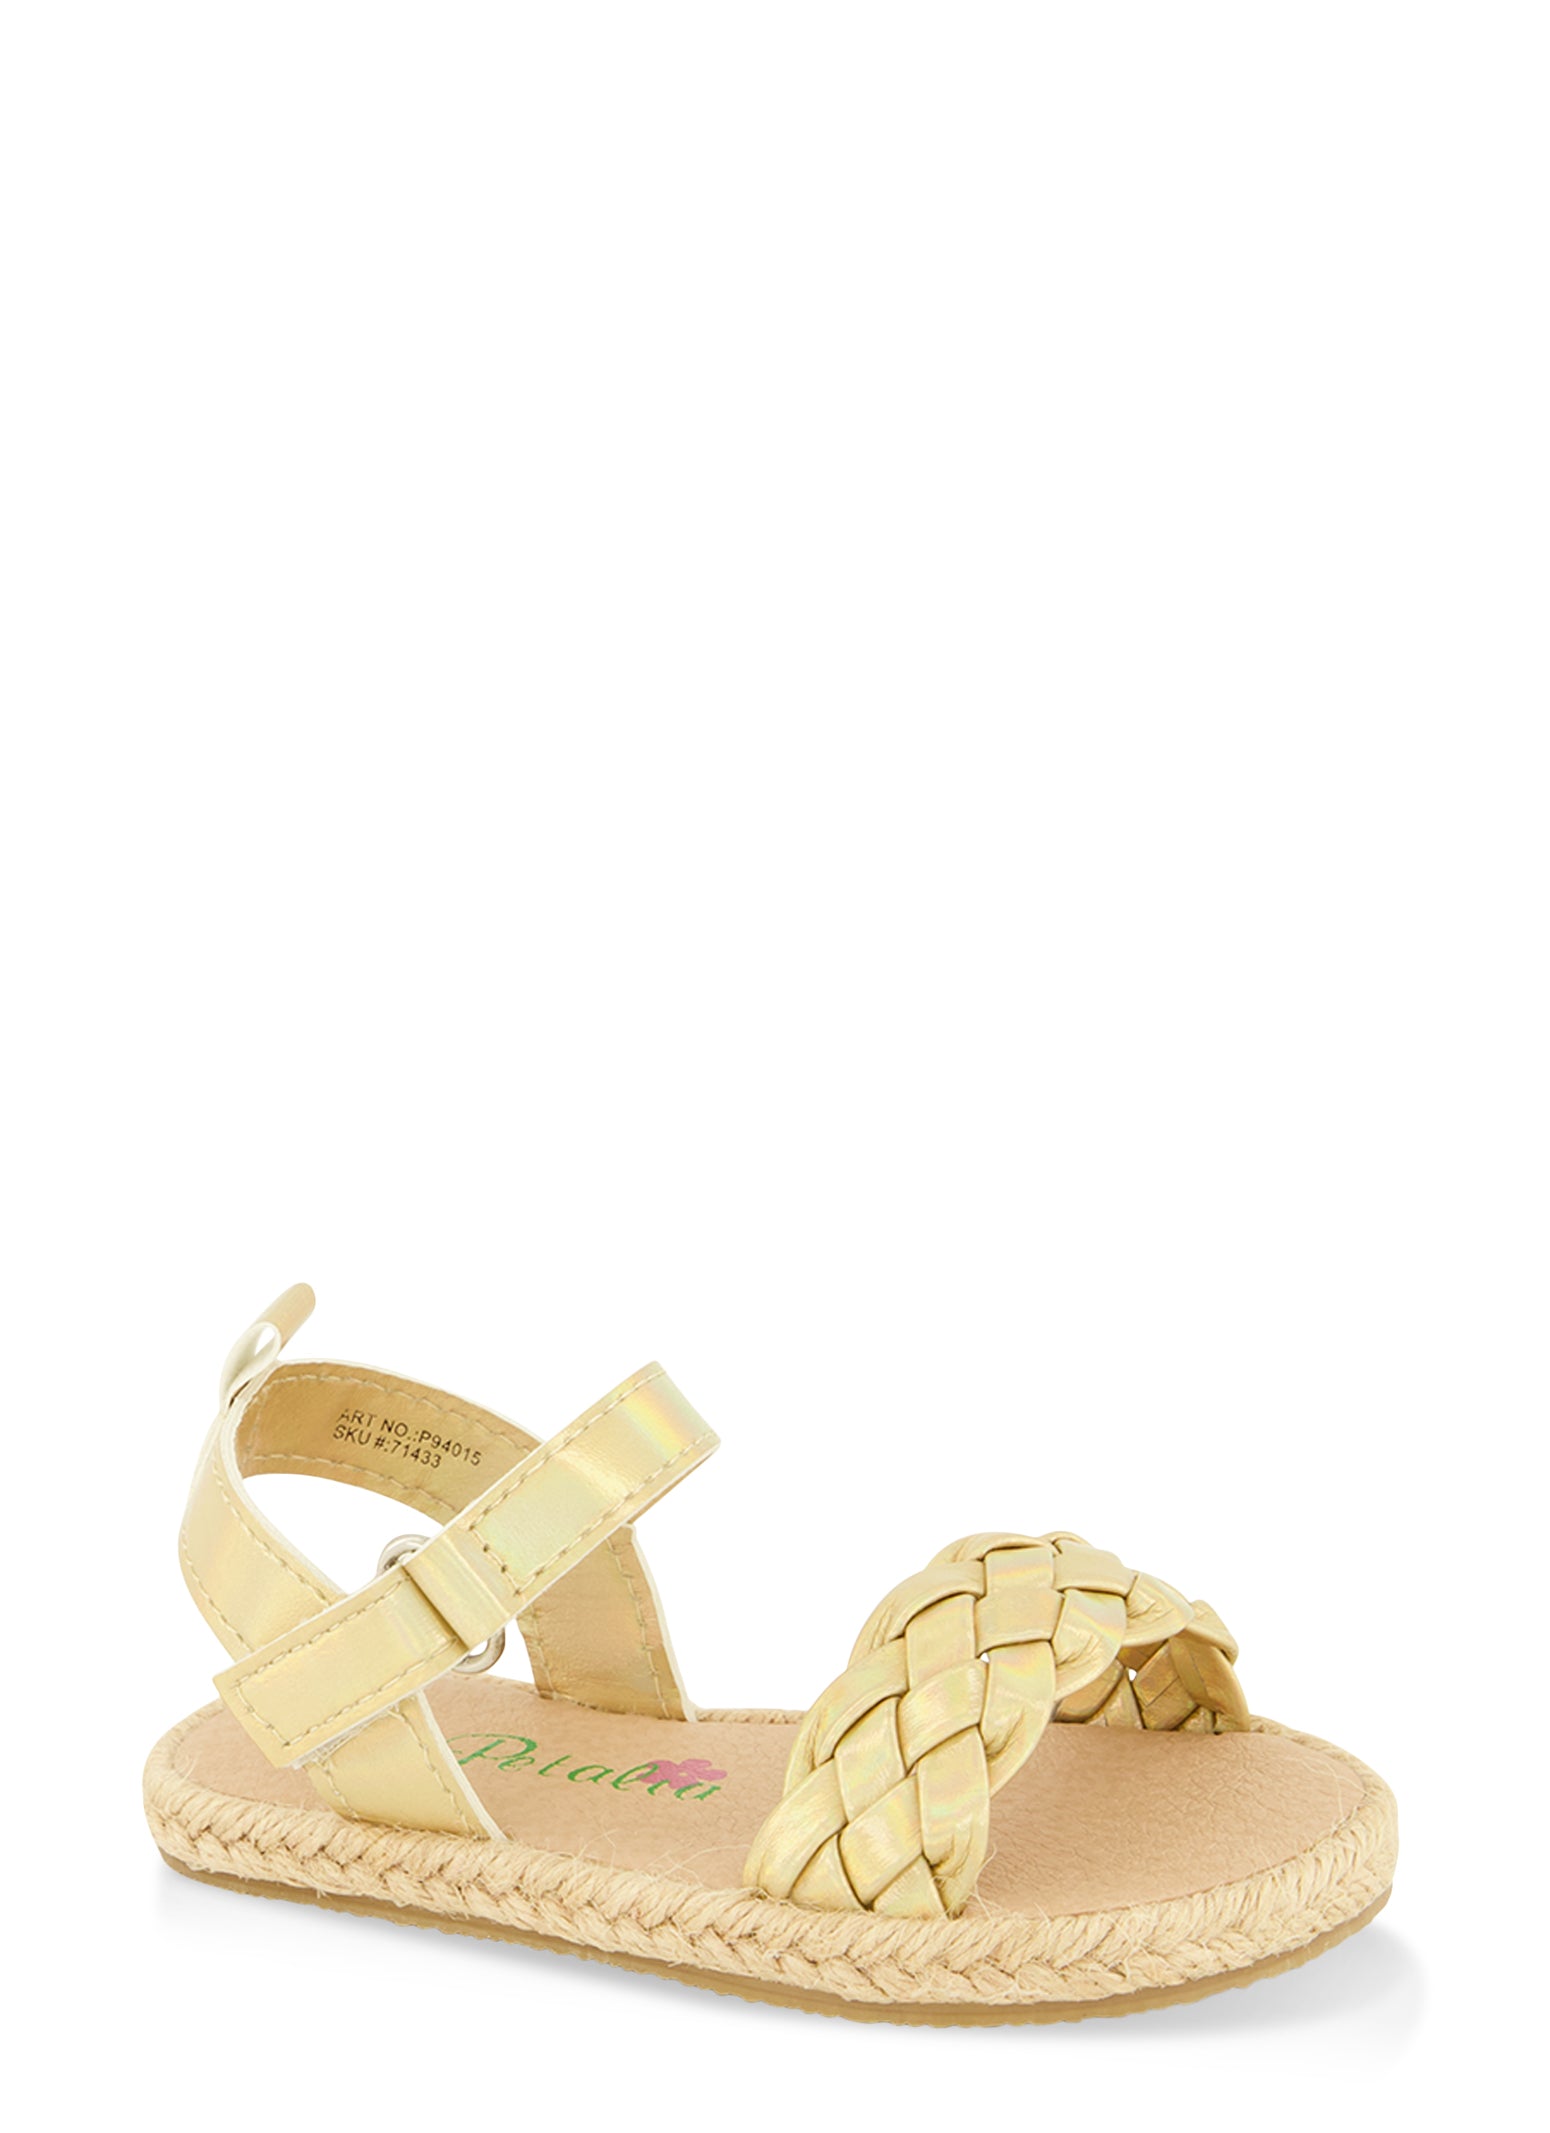 Womens Toddler Girls Braided Sandals, Gold, Size 5